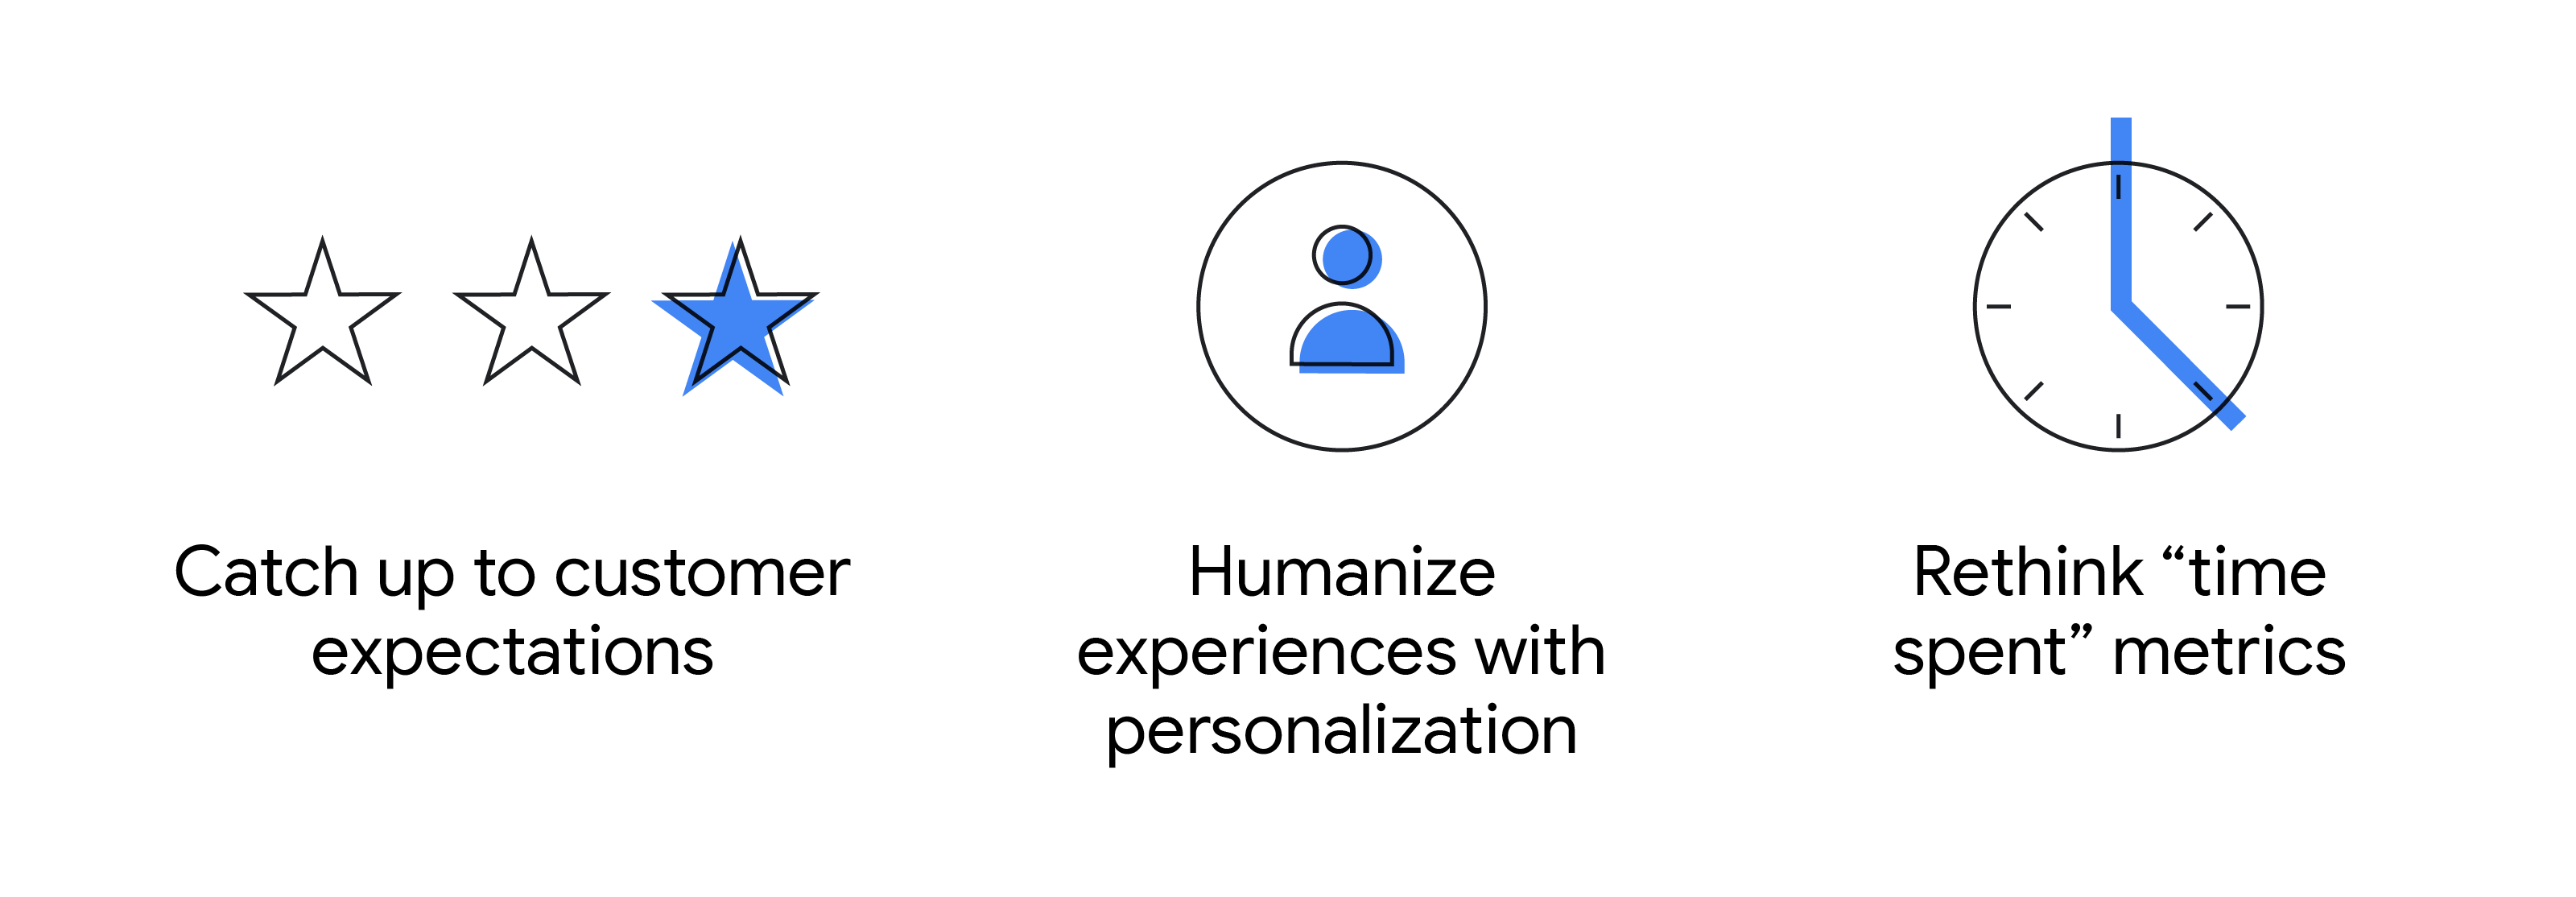 3 icons represent the takeaways for brands that want to capture early adopters’ attention. Rating stars: Catch up to customer expectations. Person icon: Humanize experiences with personalization. Clock: Rethink “time spent” metrics.